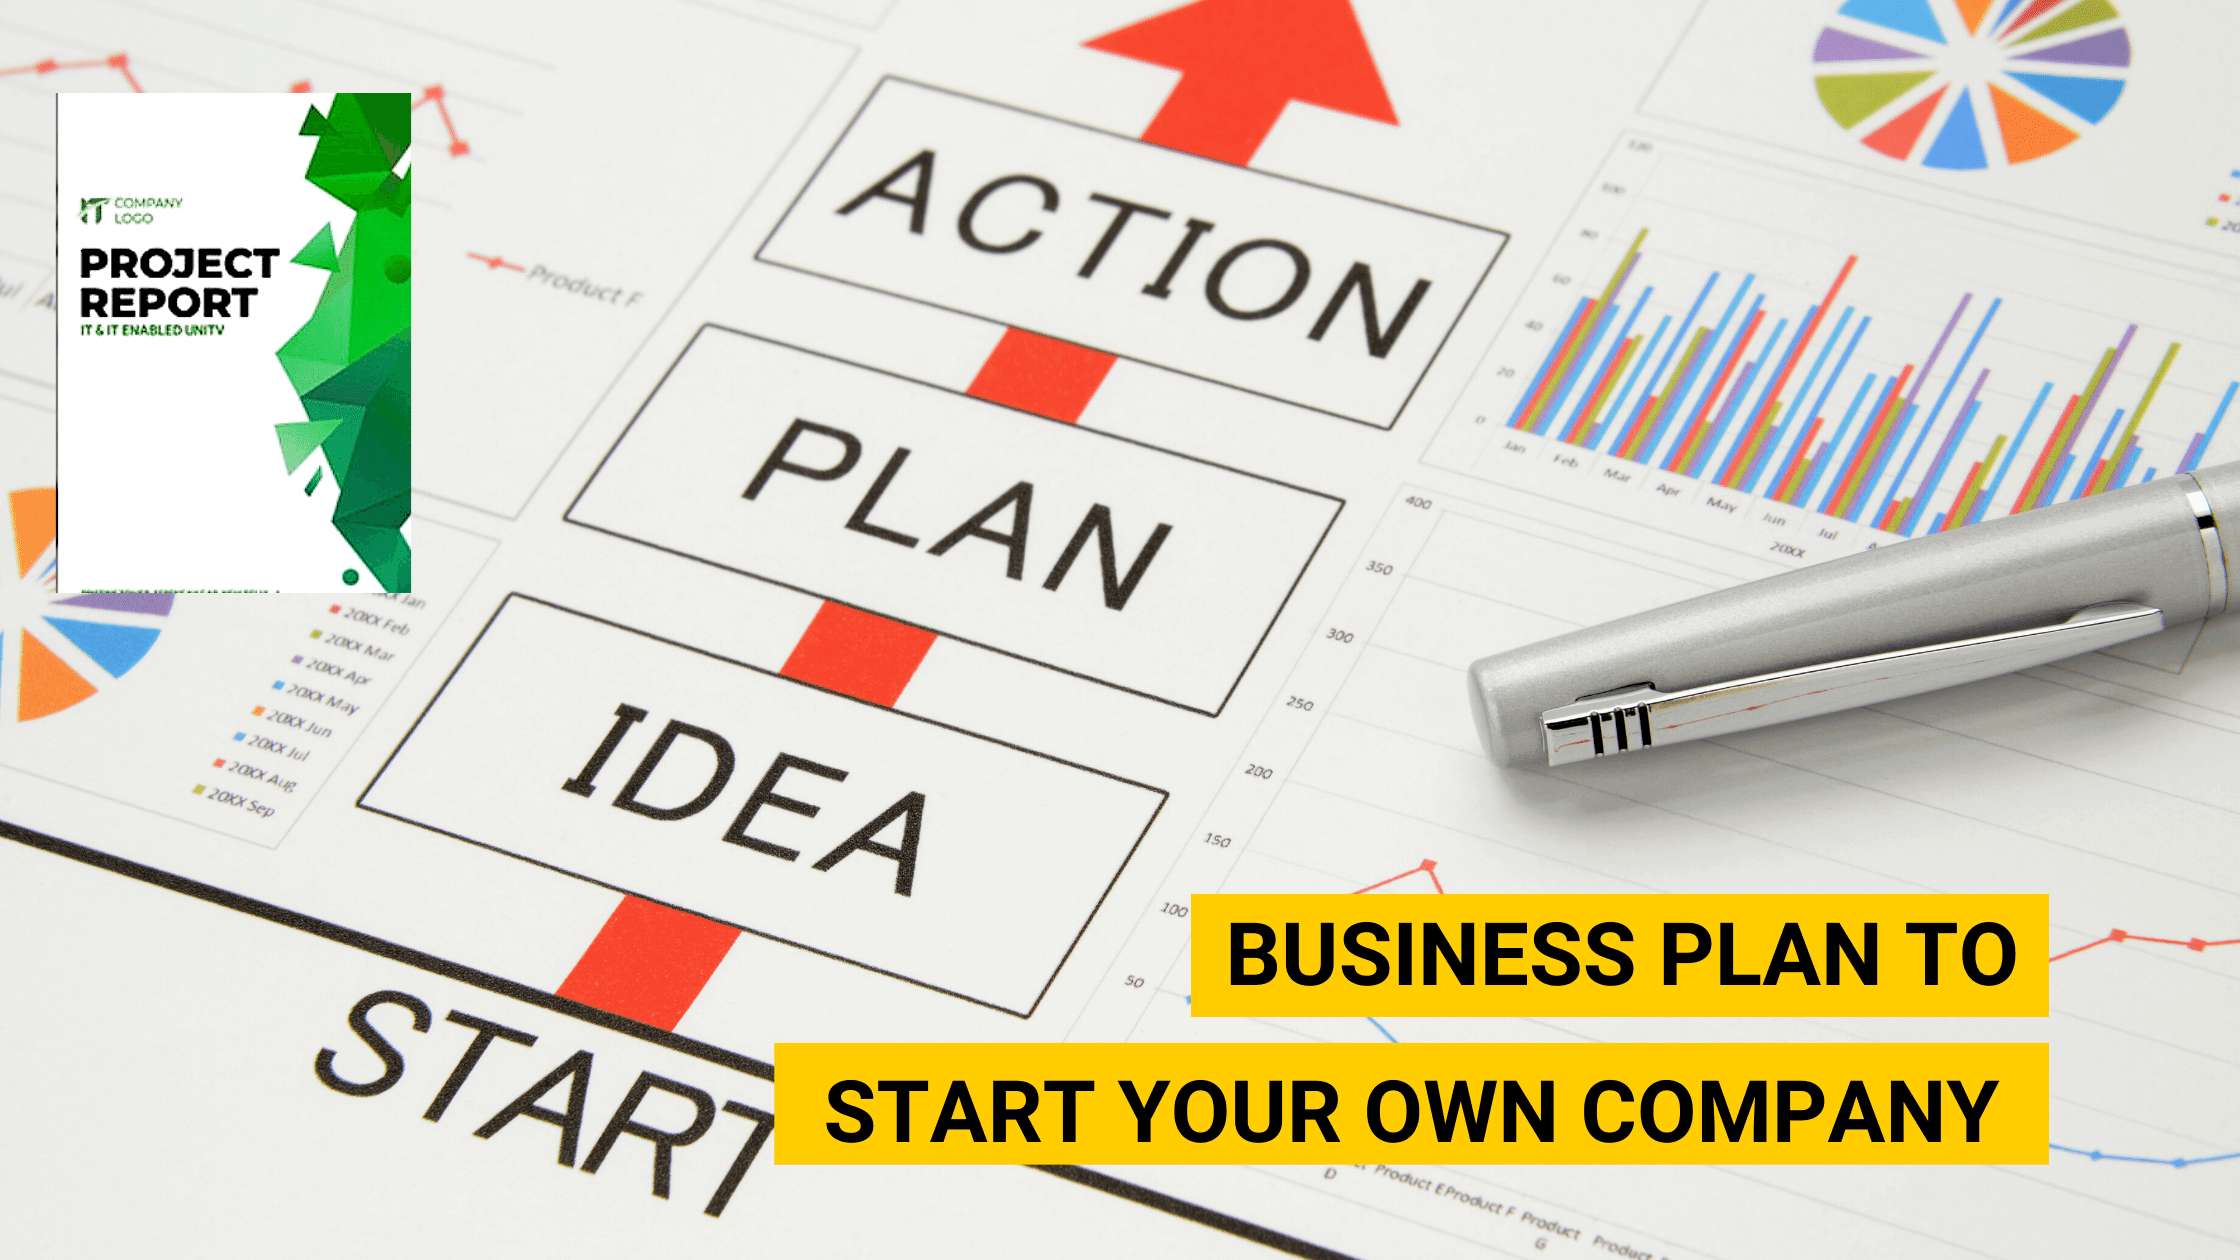 Business Plan to start your own company